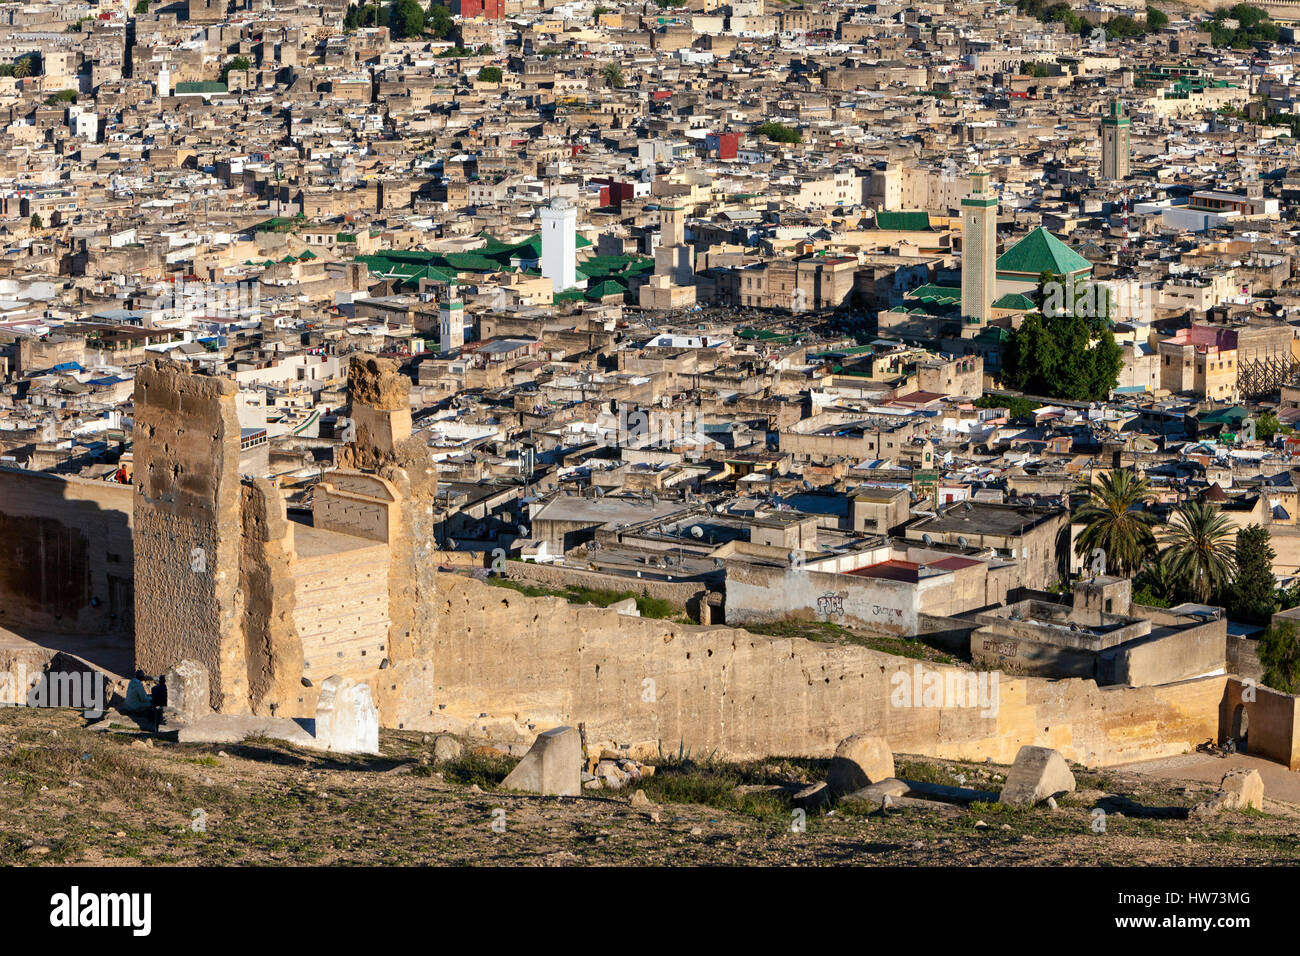 Fes, Morocco.  Old City (Fes El-Bali), Kairaouine Mosque (in center, with white minaret), Zawiya of Moulay Idris (on right, with tiled minaret).  Rema Stock Photo